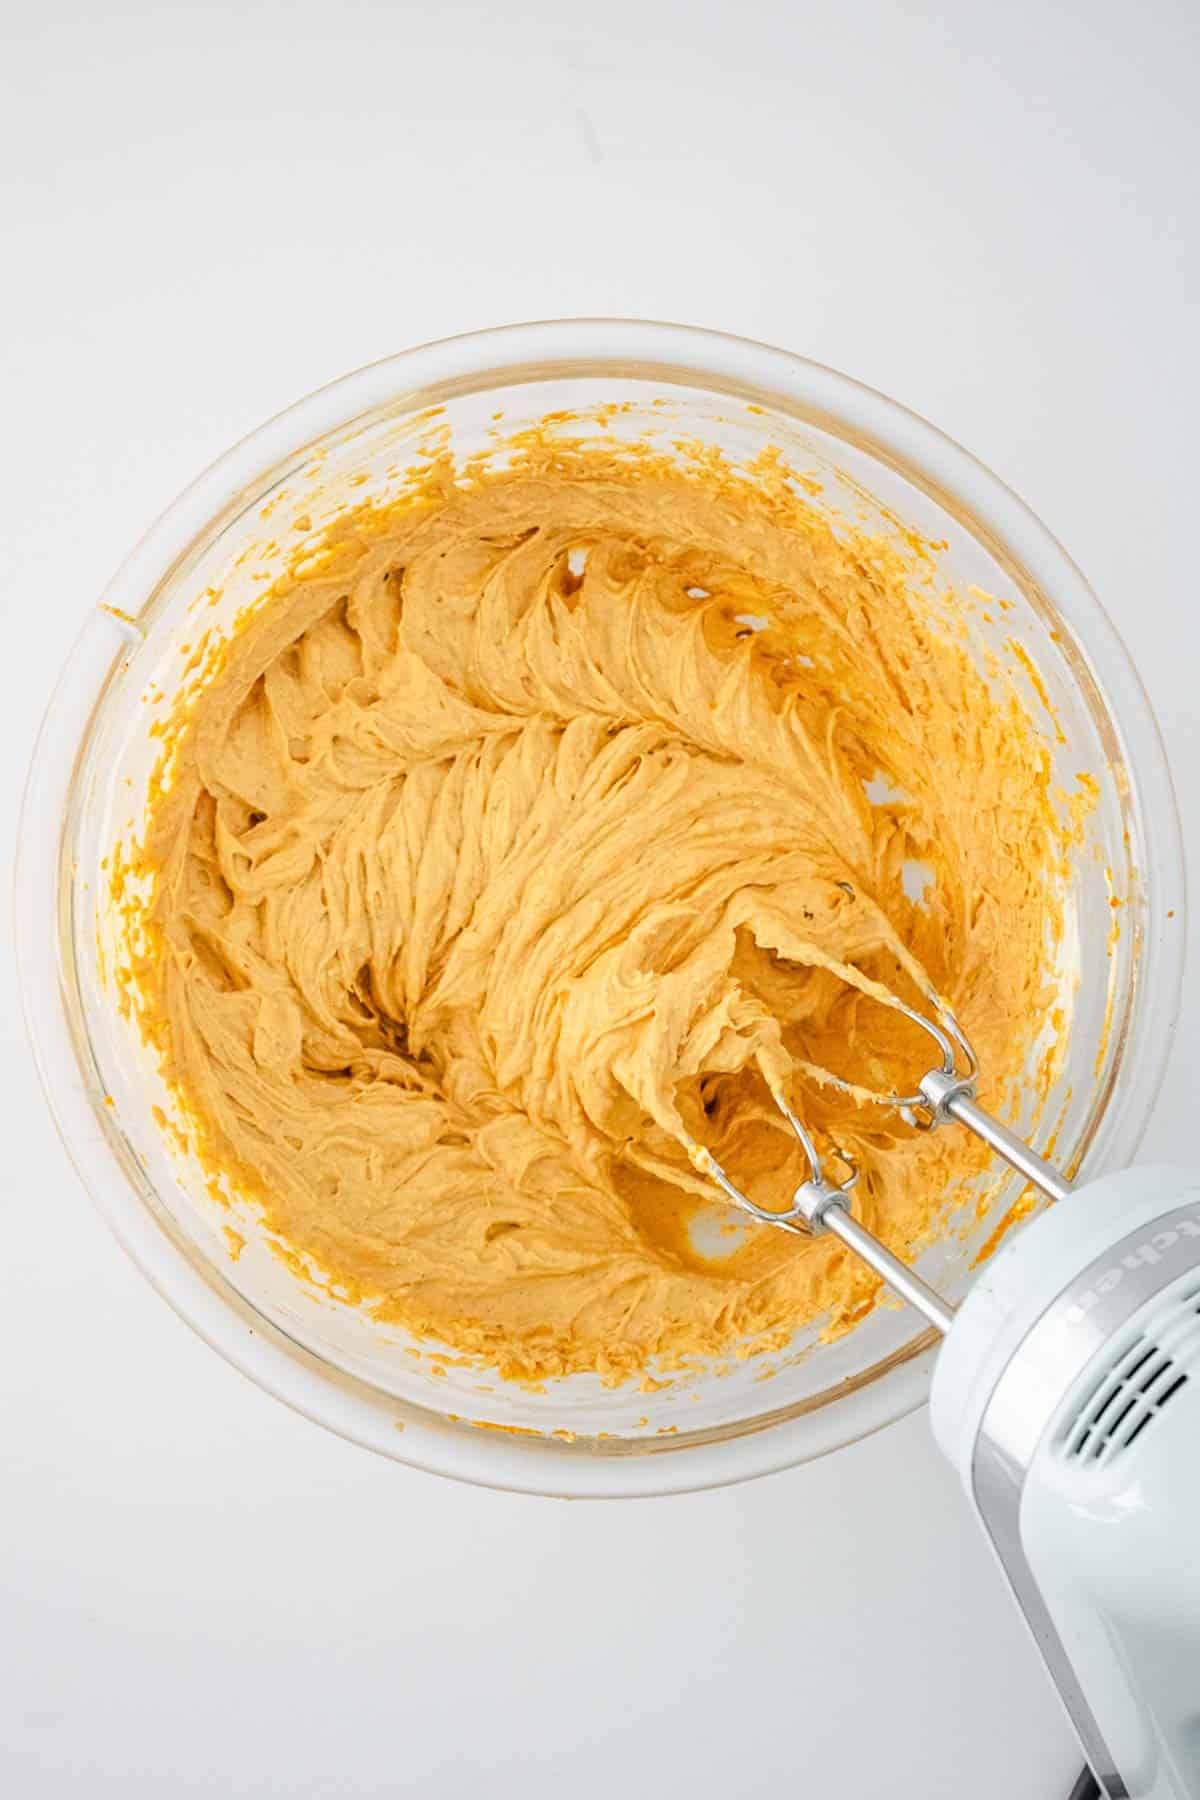 A mixer is being used to make pumpkin cheesecake batter.